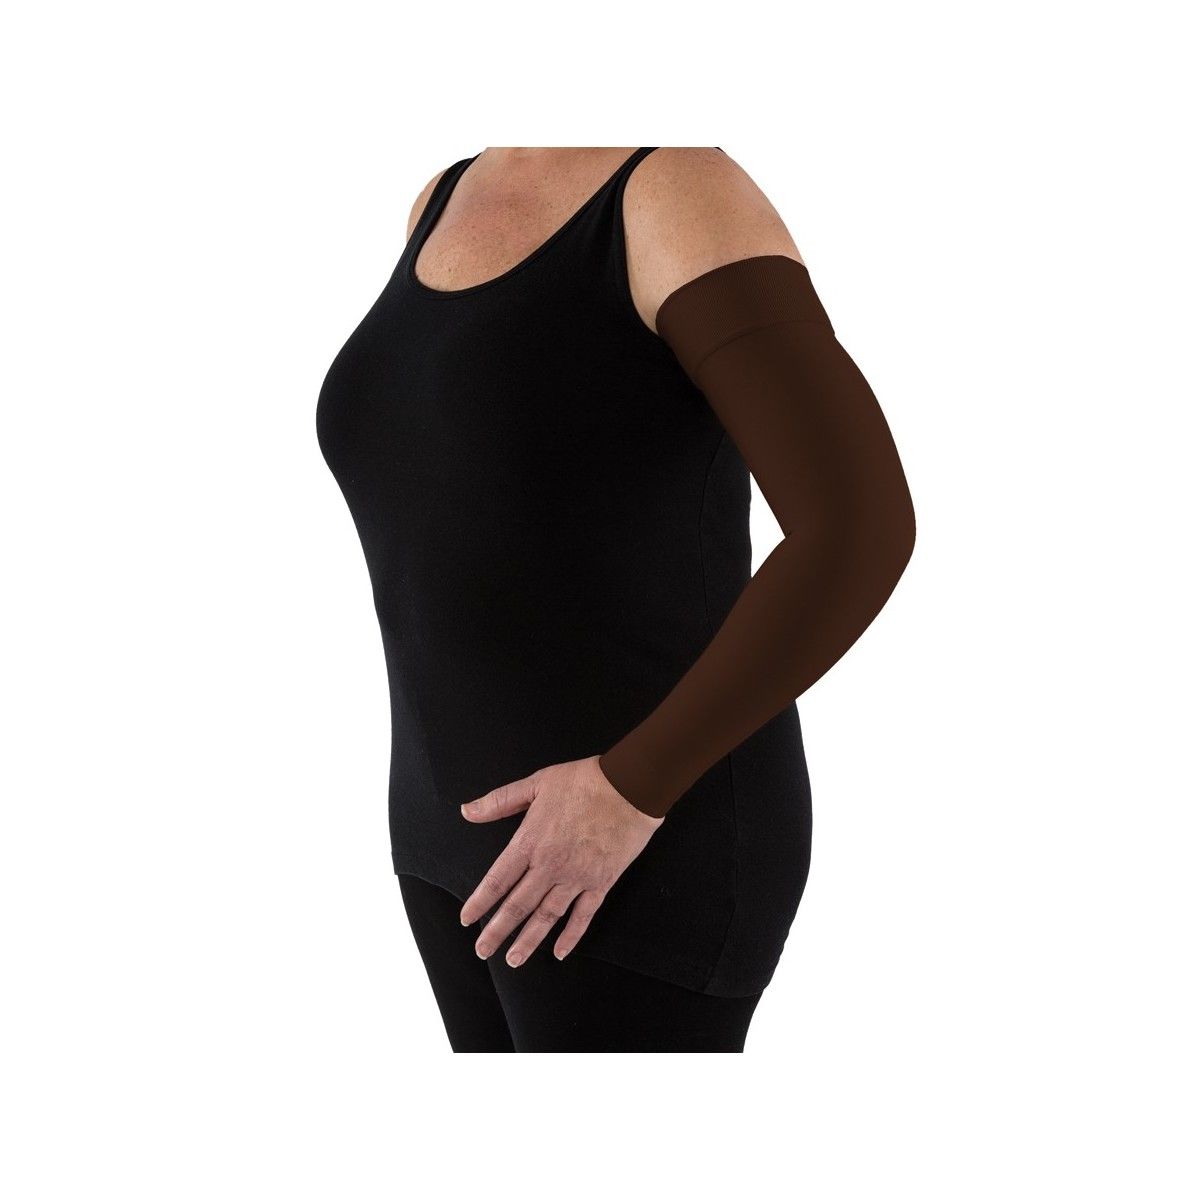 Shop by Category - Lymphedema / Compression - Shirts & Camisoles